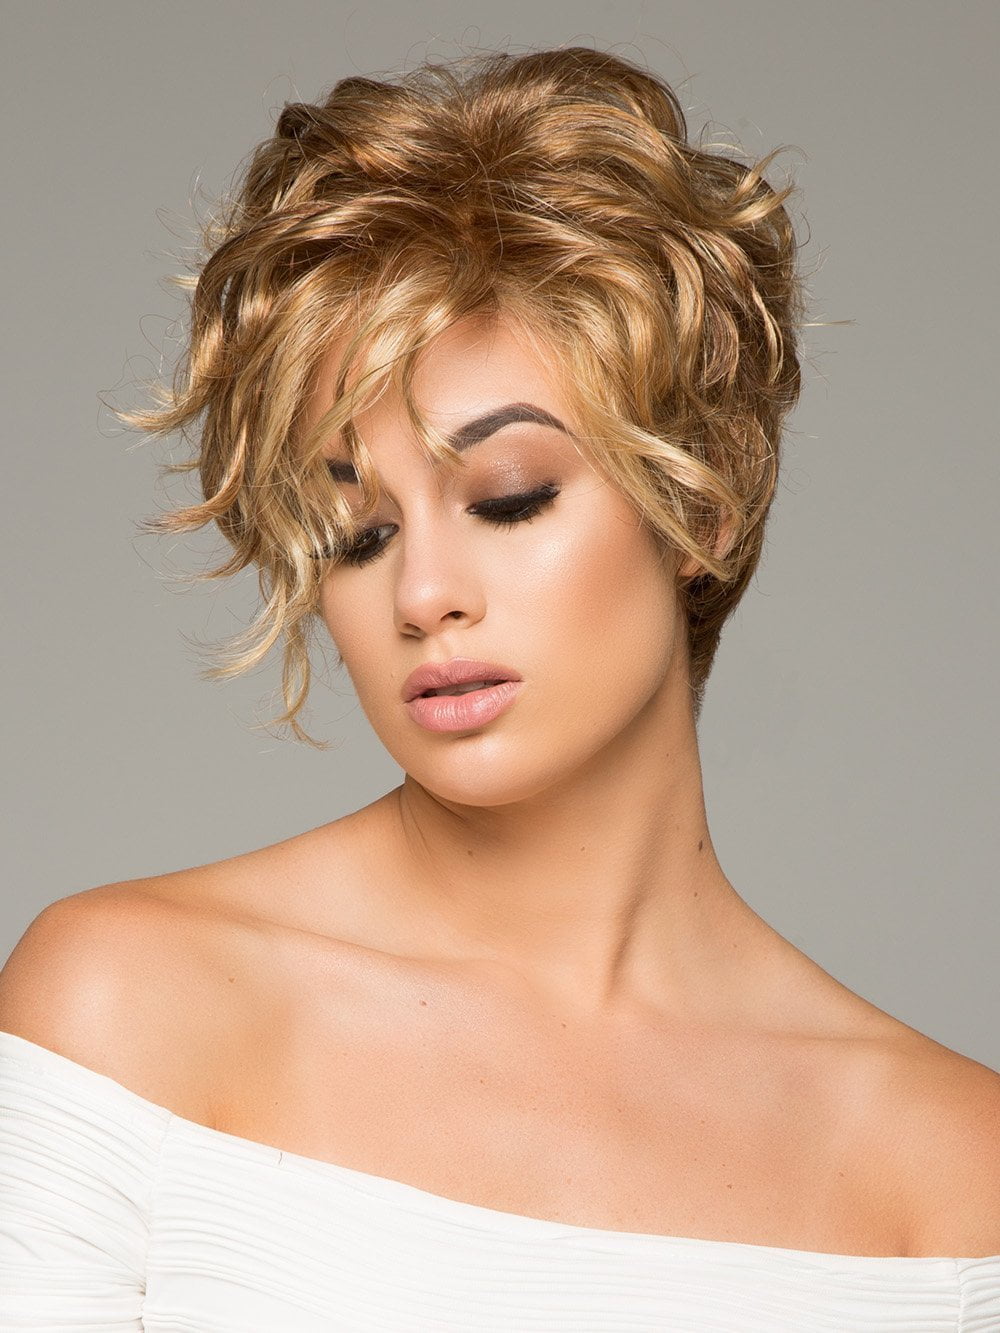 THE NEW ROMANTIC by RAQUEL WELCH in R29S+ GLAZED STRAWBERRY | Light Red with Strawberry Blonde Highlights	